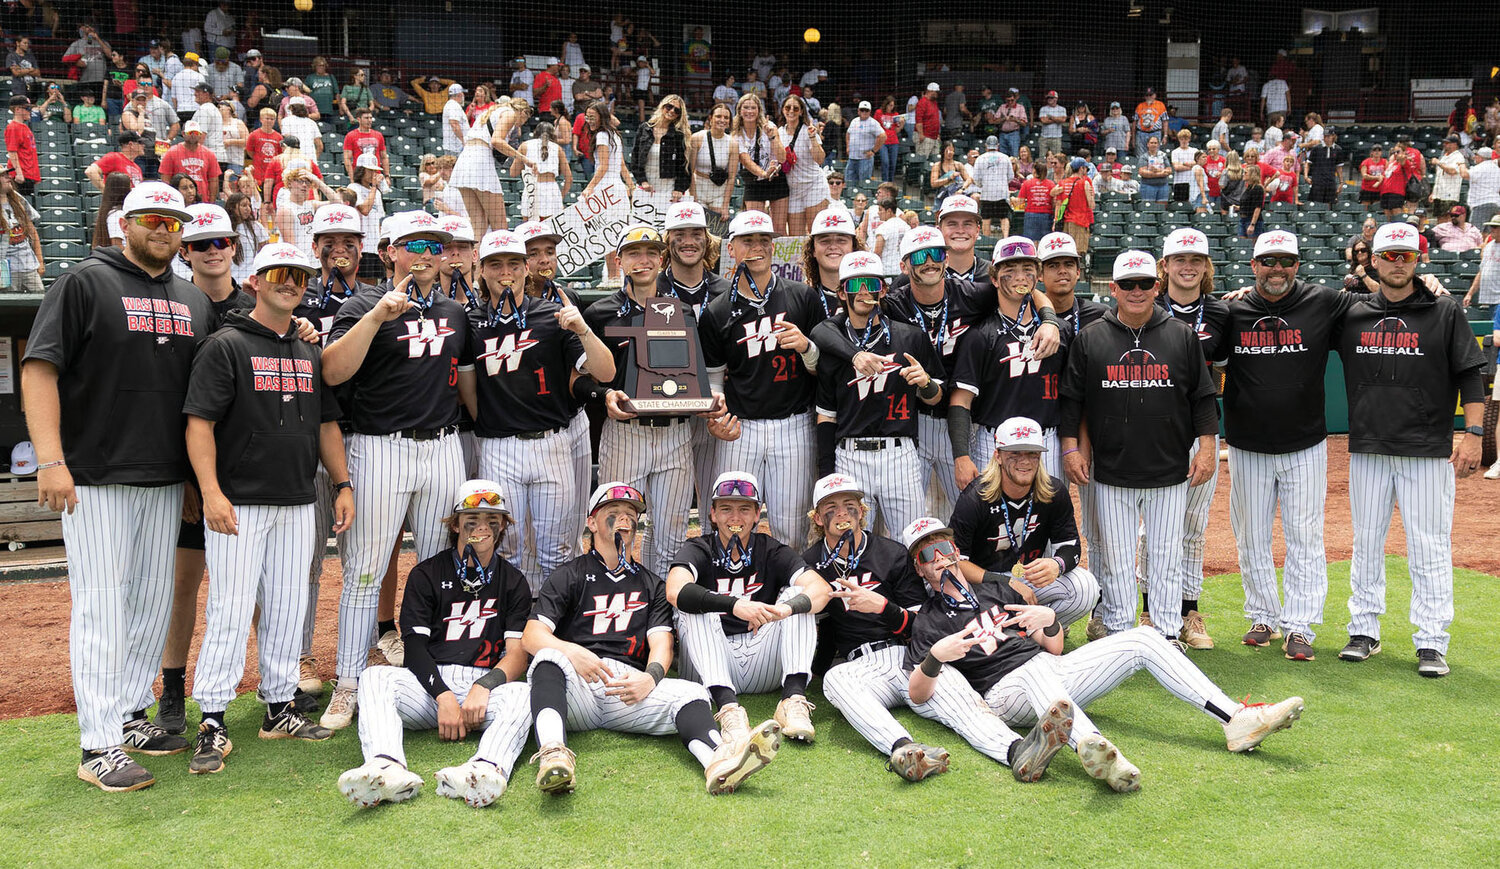 The Washington Warrior baseball team repeated as Class 3A State champions. They defeated Cascia Hall 10-7 Saturday at Chickasaw Bricktown Ballpark Saturday to bring home the title.